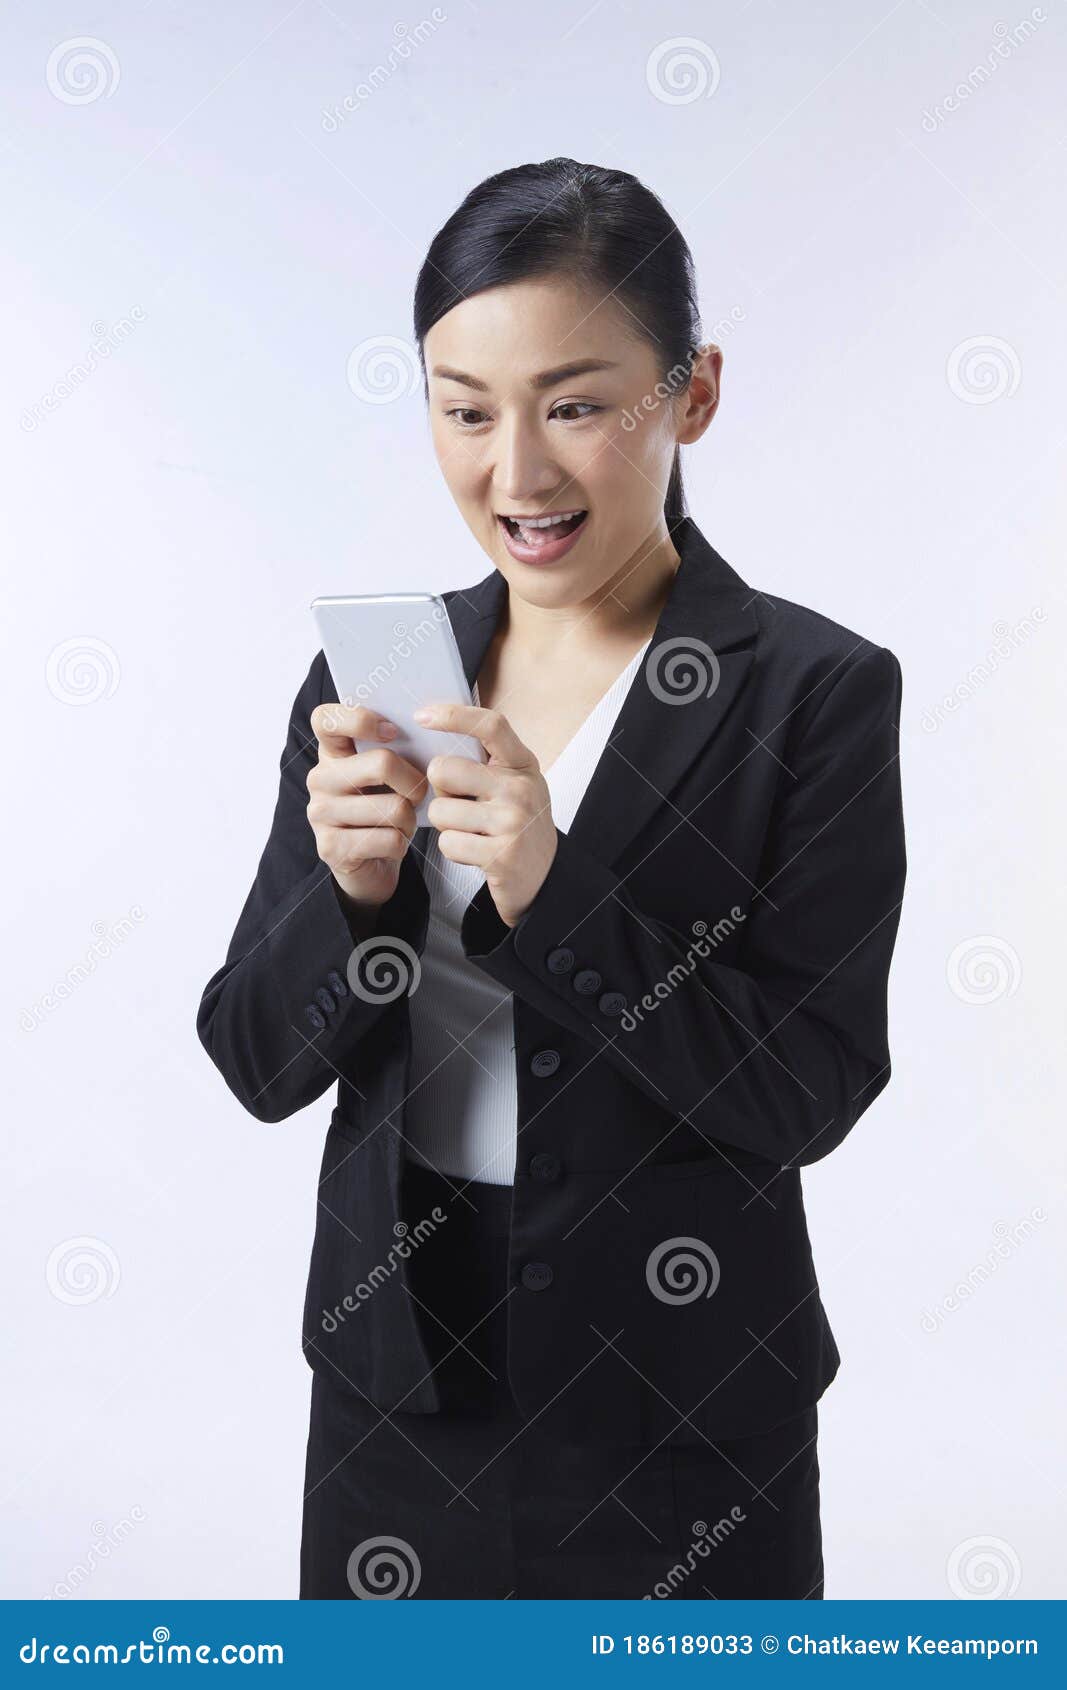 an asian woman looking at her mobile phone very gladly. business ideas, job applications, good news, selection, finalists